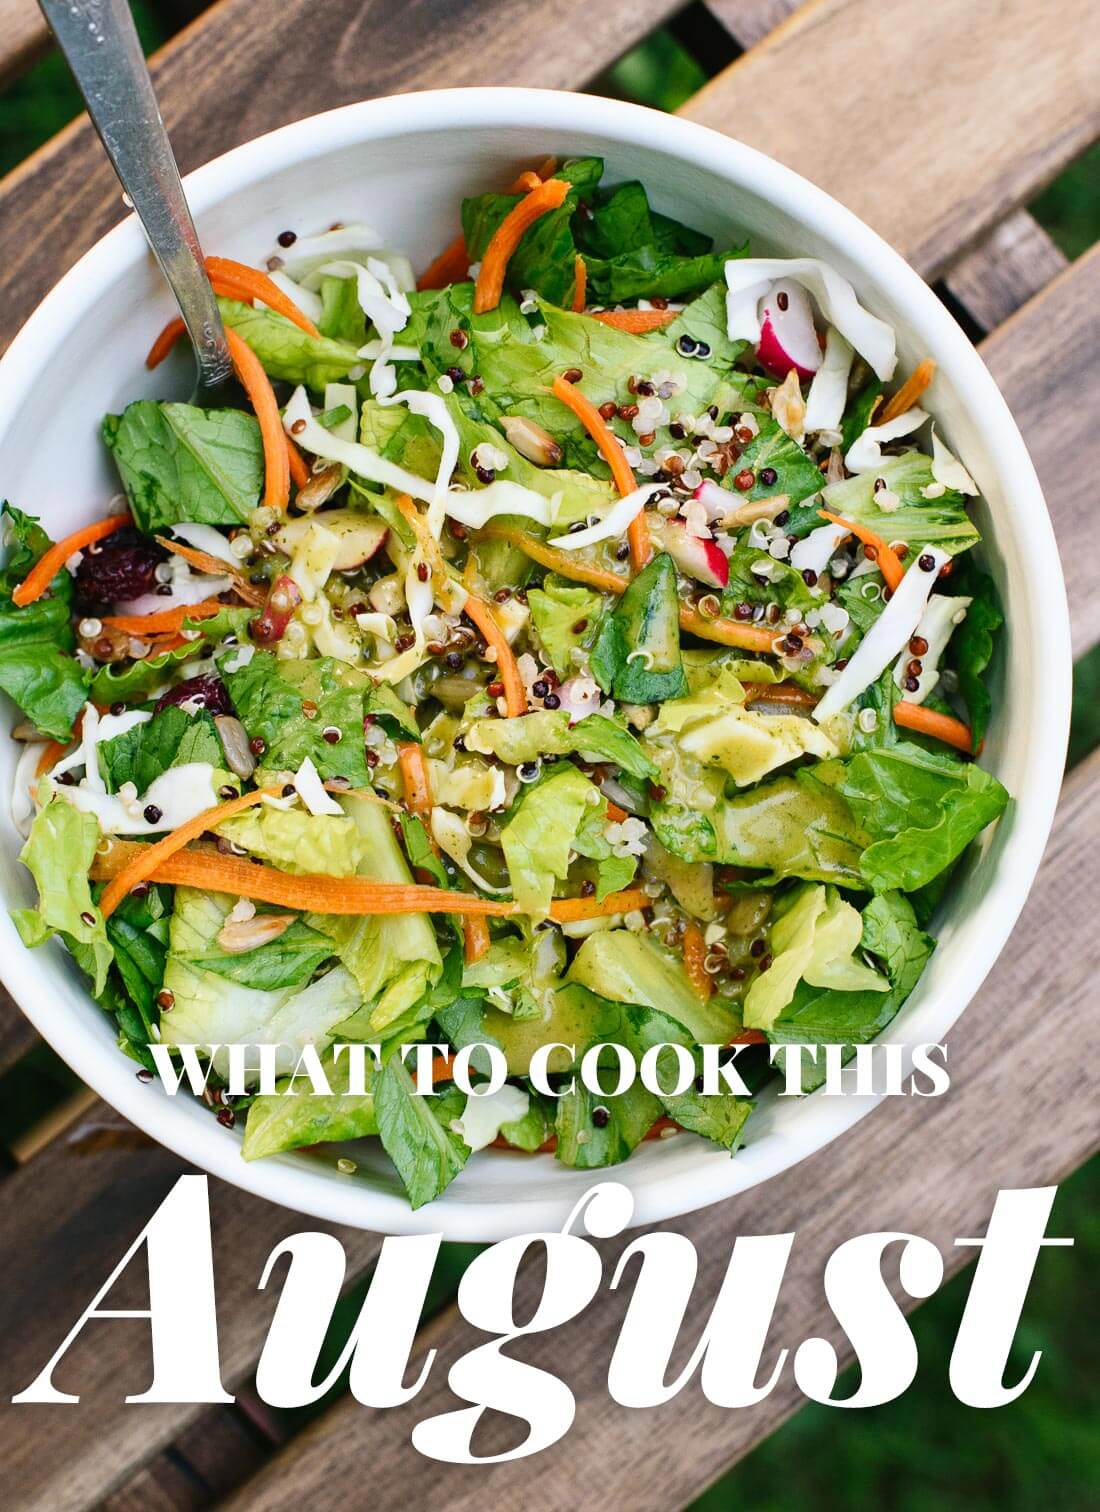 Learn what's in season this month at cookieandkate.com!